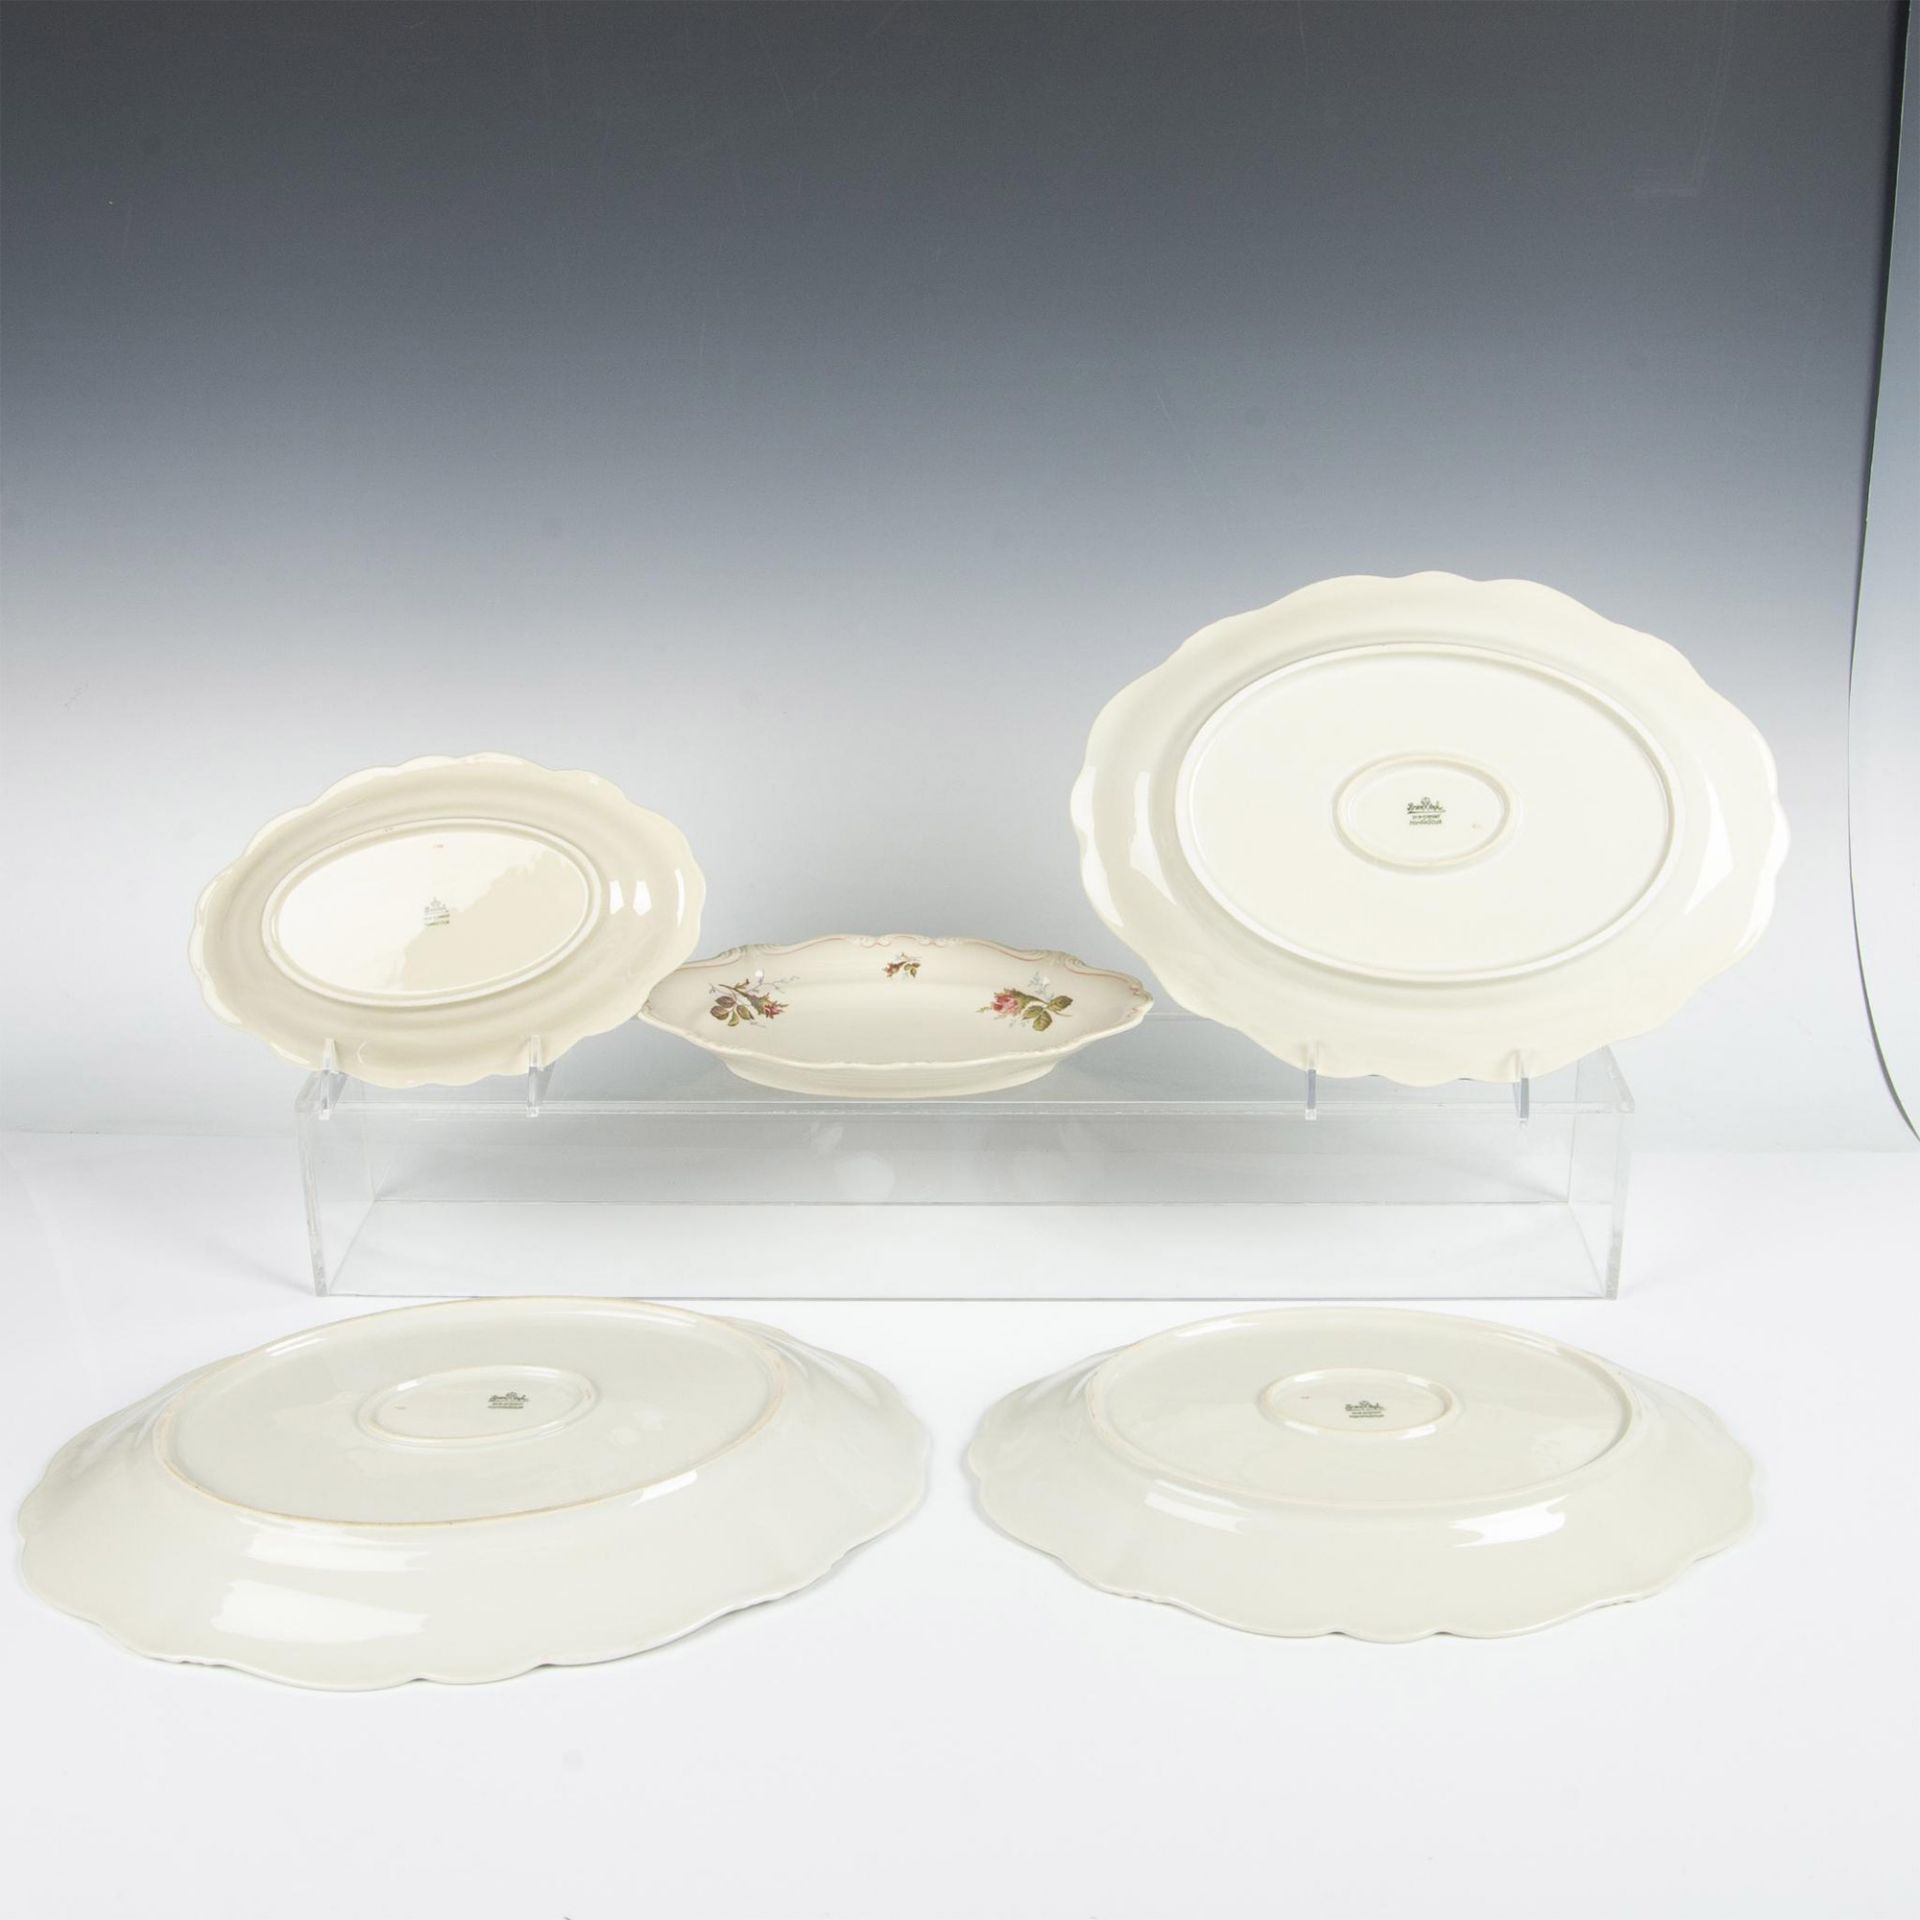 5pc Rosenthal Selb-Germany Pompadour Moss Rose Oval Platters - Image 5 of 5